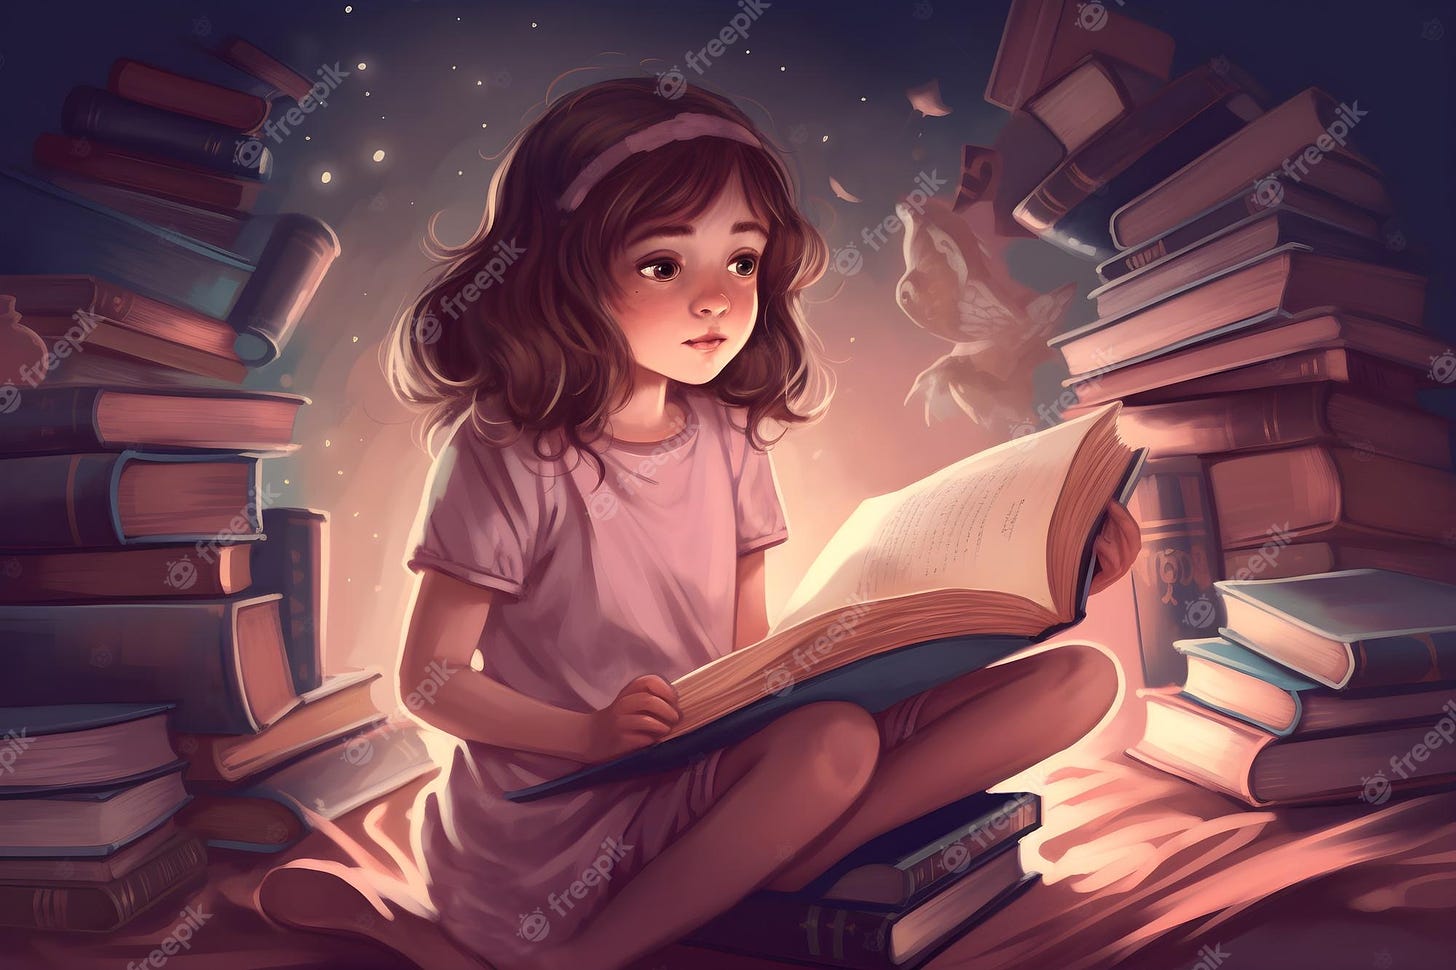 Premium Photo | A girl reading a book in a stack of books